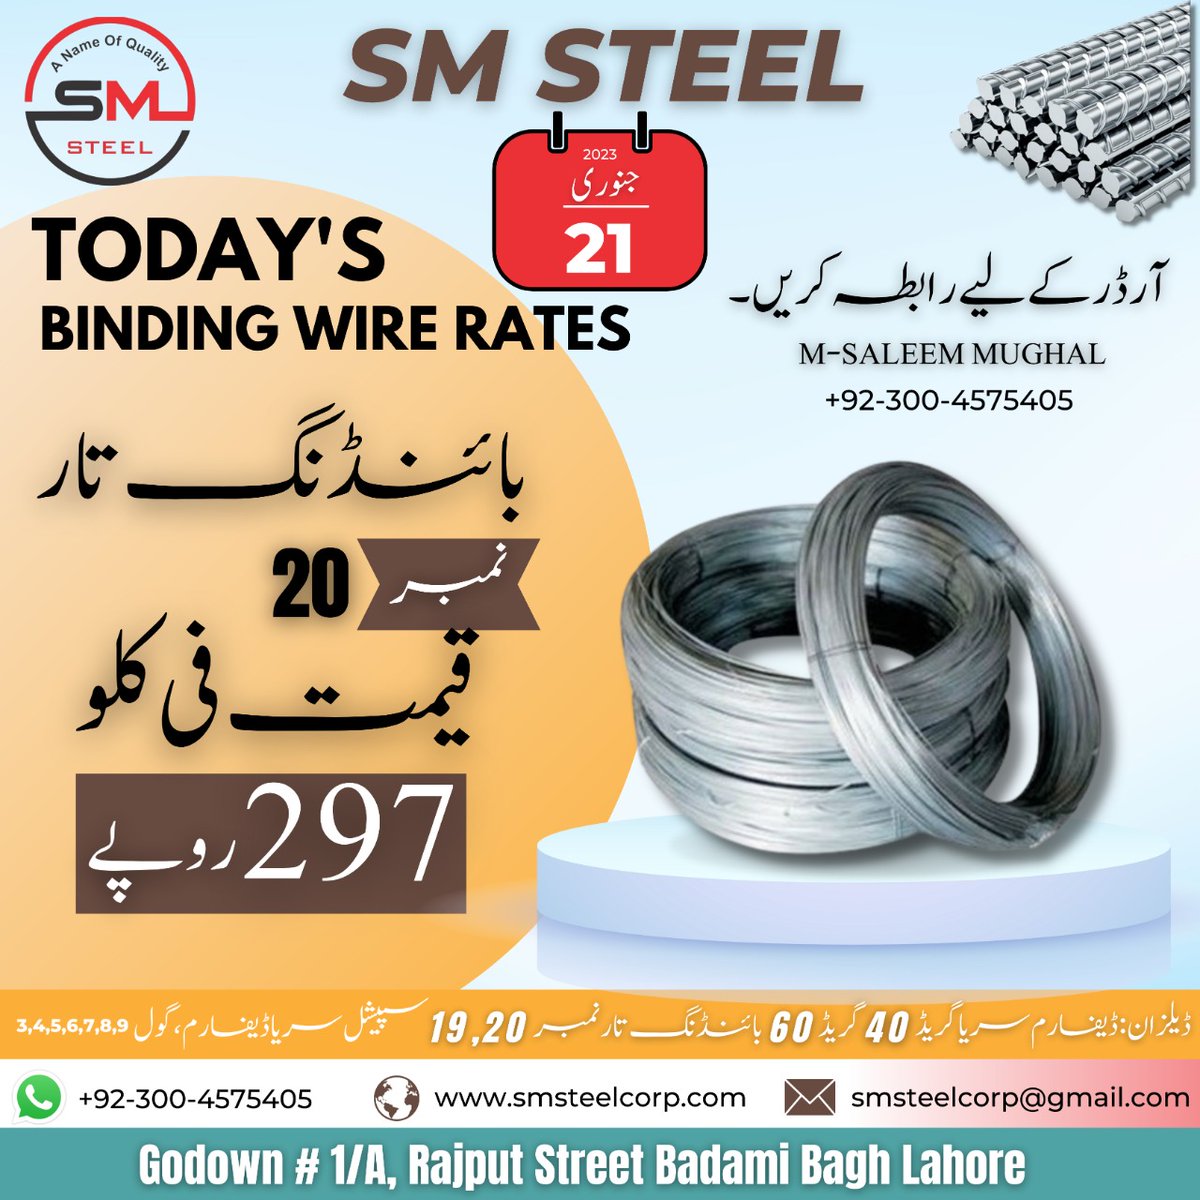 Today's Rates Binding Wire Gauge No. 20

SMSteel #SMMarketing #BindingWire #BoundryWall #RCCPipes #SeweragePipes #SheikhooSteel